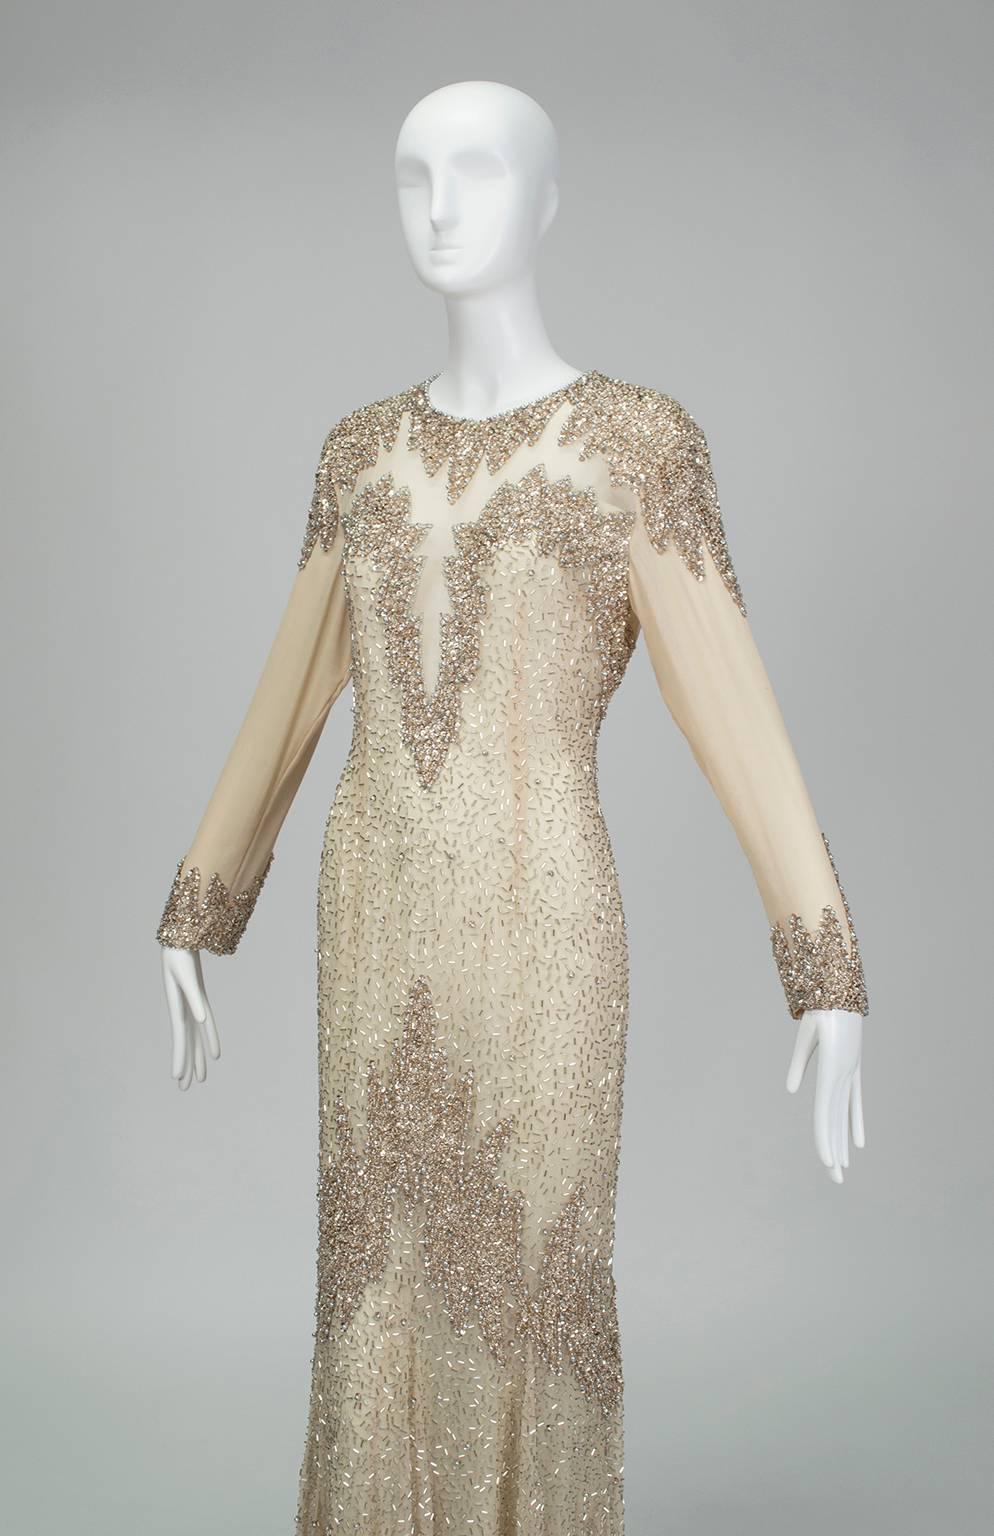 Oleg Cassini Nude Rose Gold Bead and Sequin Evening Gown - US 6, 1990s For Sale 1